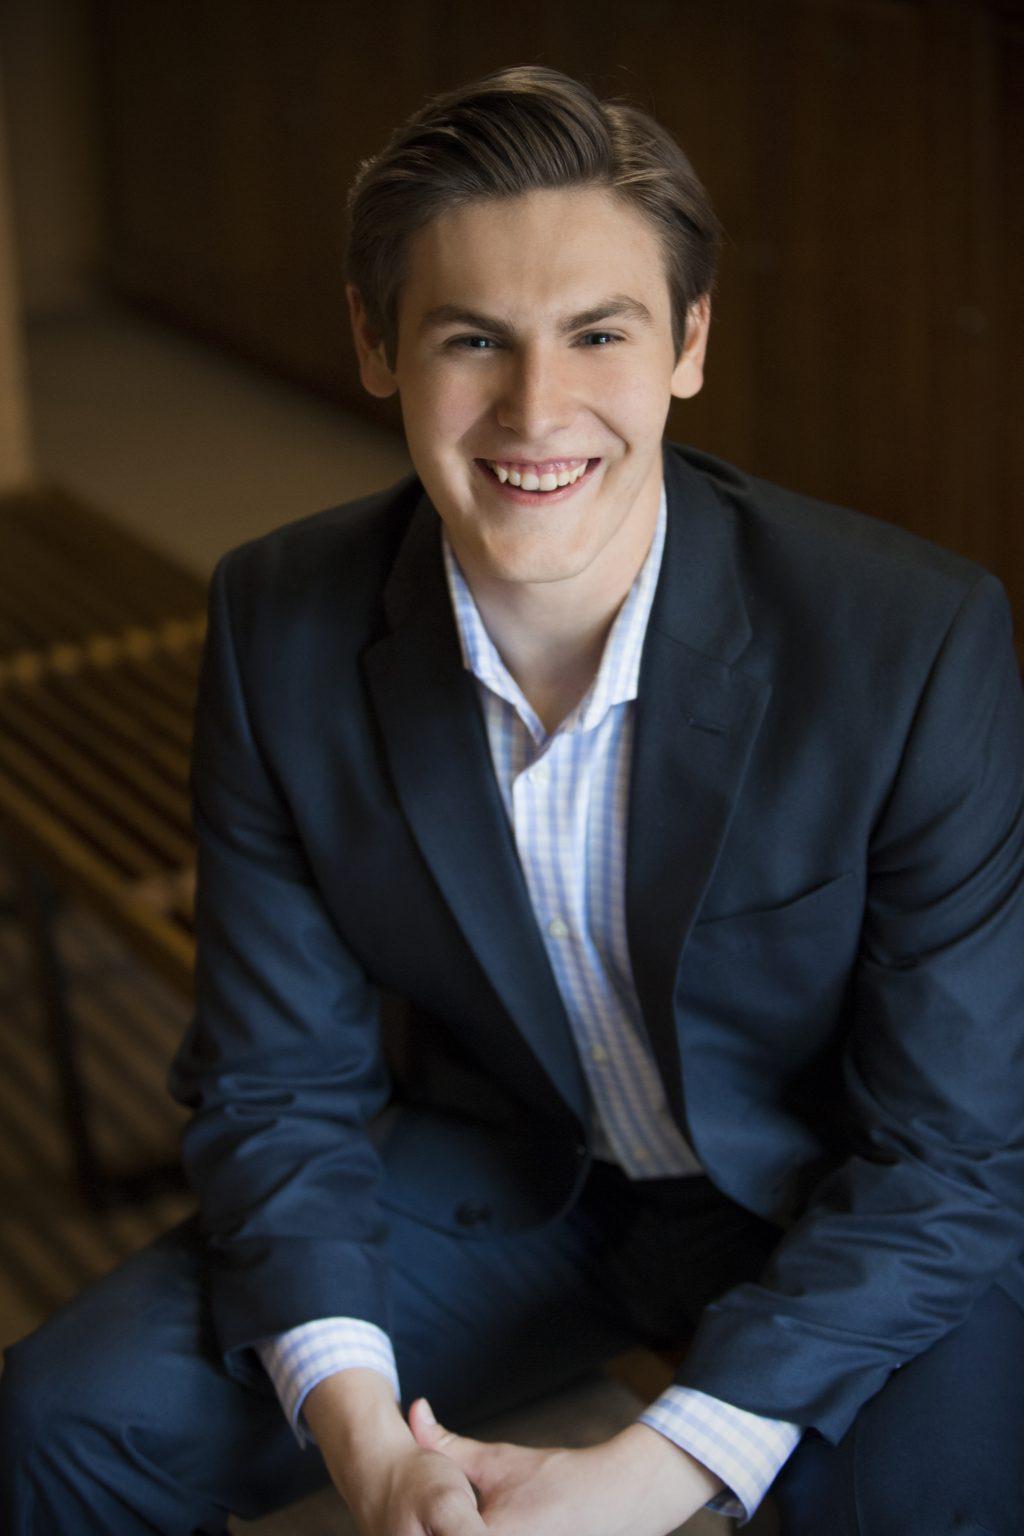 Senior Music major Liam Nixon smiles for a headshot at Taos Opera Institute in New Mexico during the summer. Nixon, a chamber choir singer, said his dream is to sing professionally, travel the world, perform opera in Europe and hopefully end up at the Met. Photo courtesy of Liam Nixon